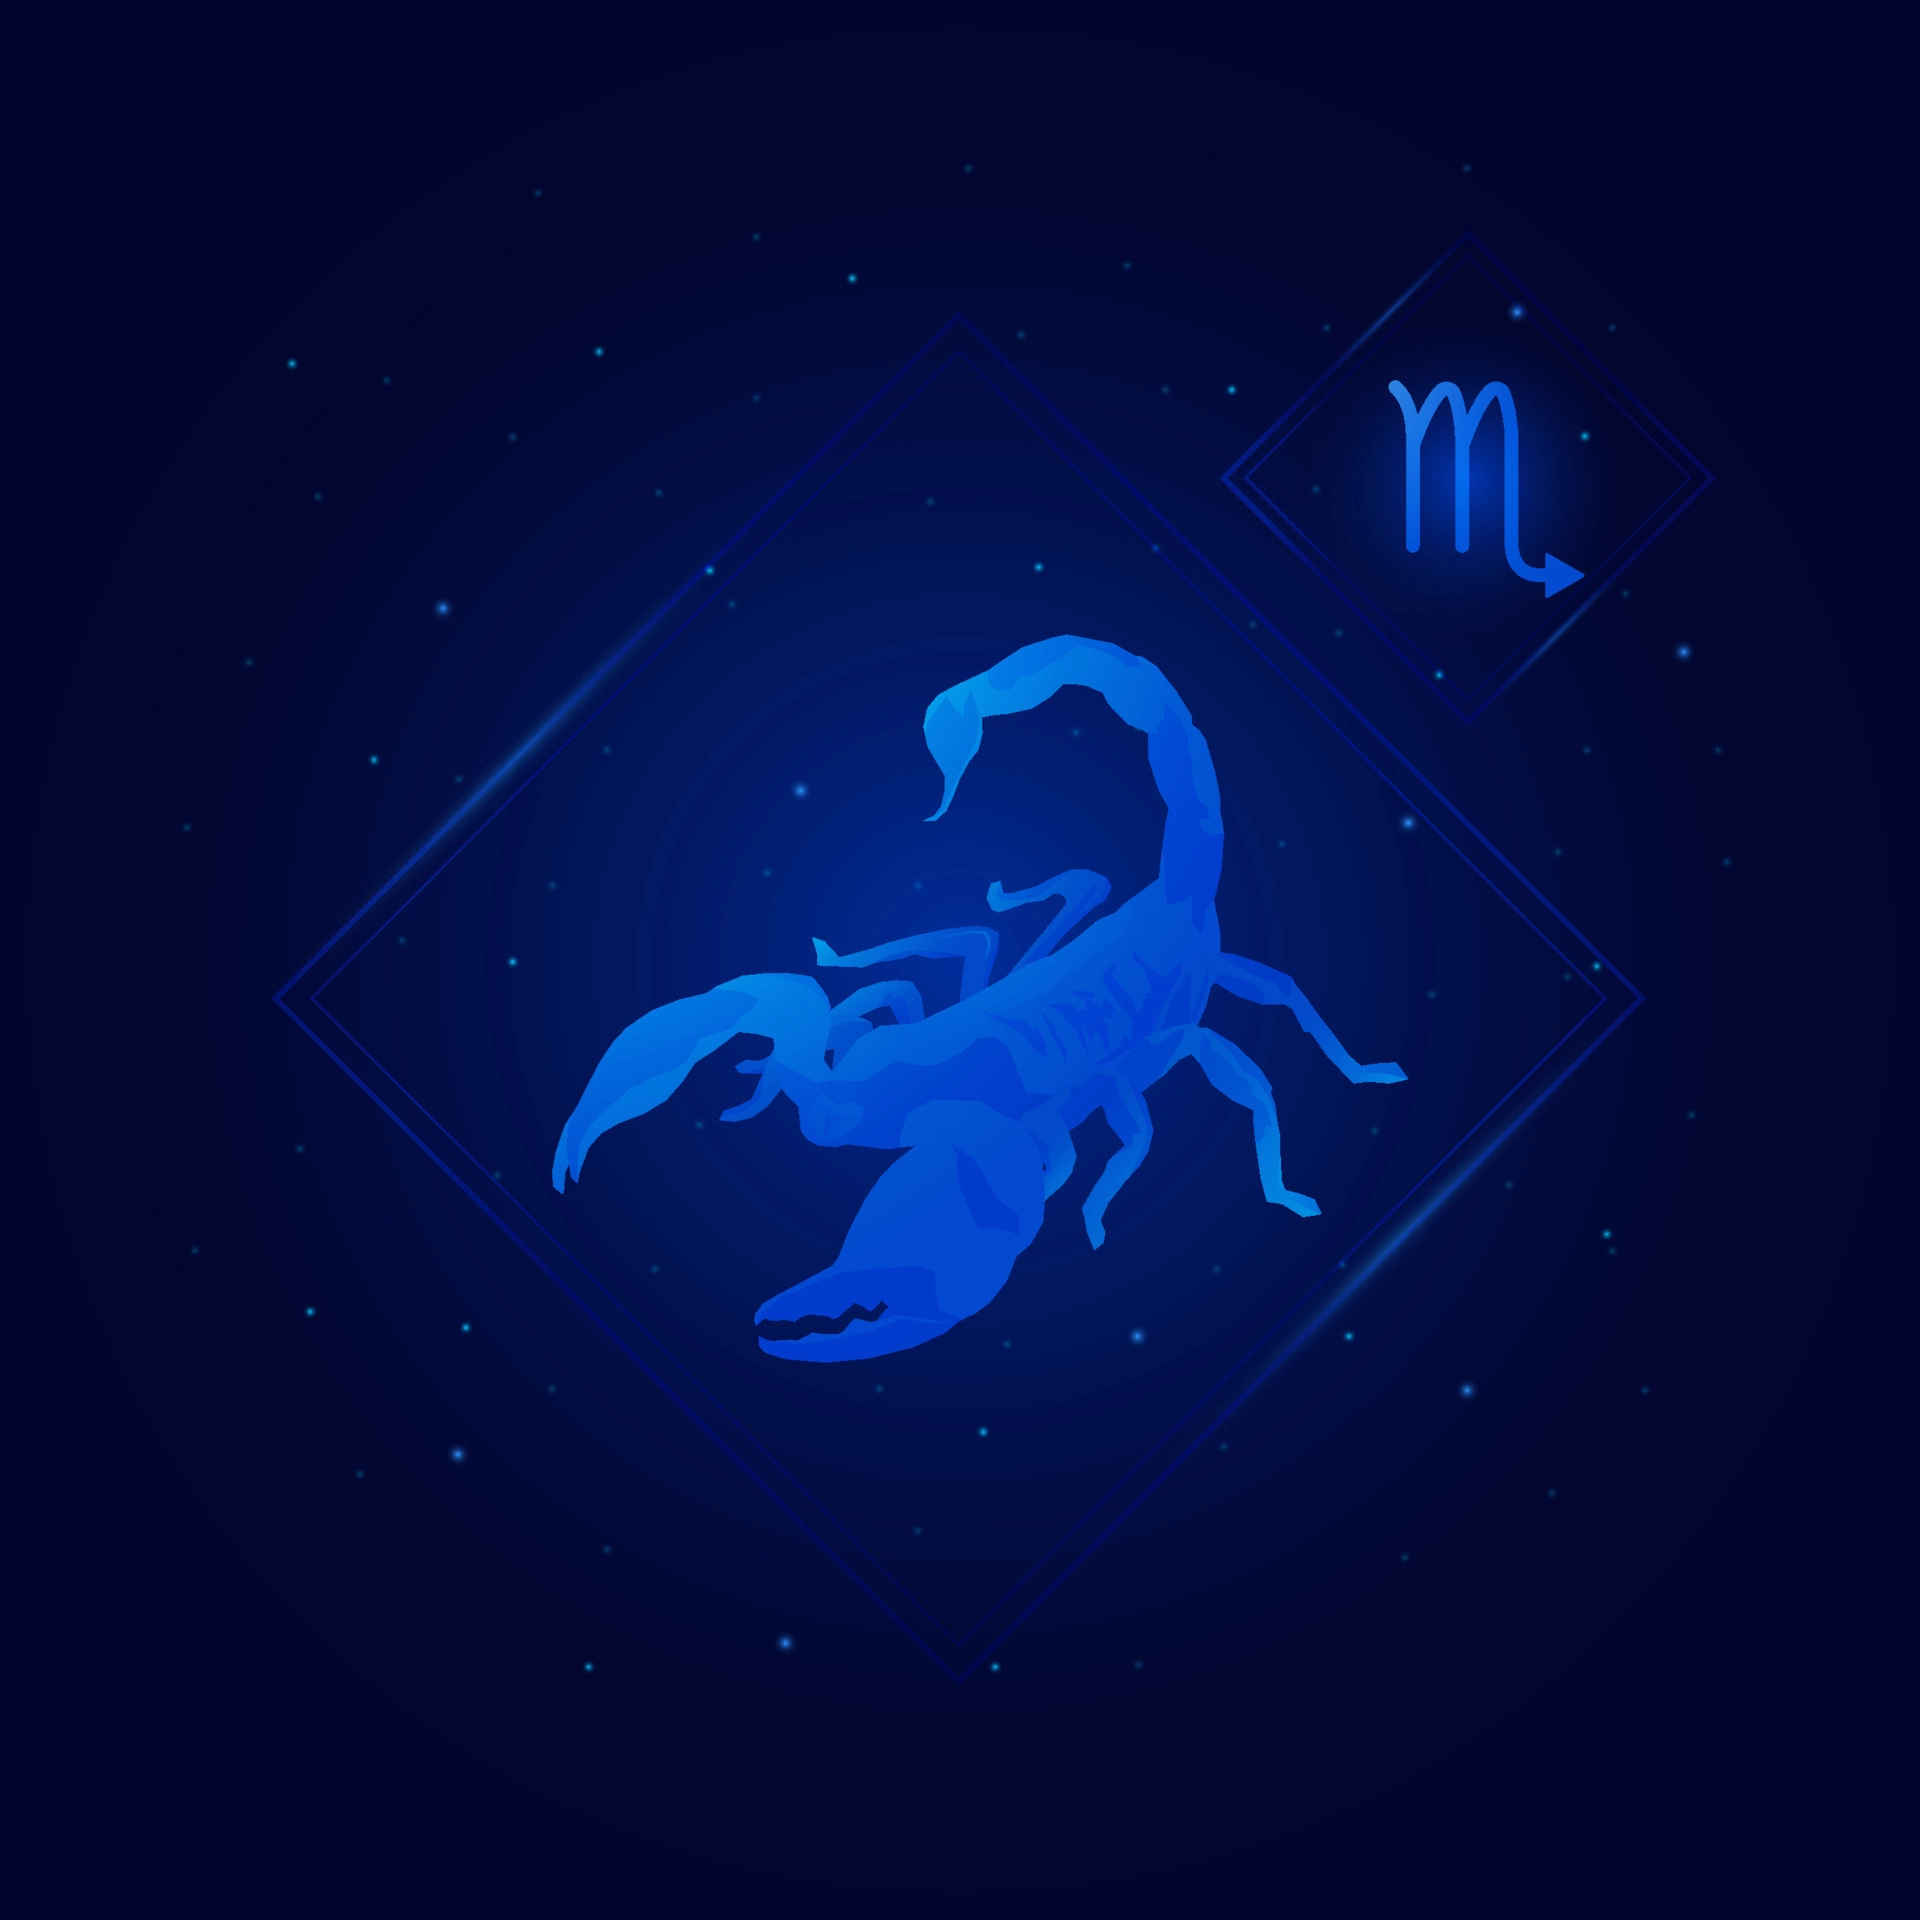 1920x1920 scorpio zodiac sign icons,scorpio of Zodiac with galaxy stars background,Astrology horoscope with signs 4896849 Vector Art